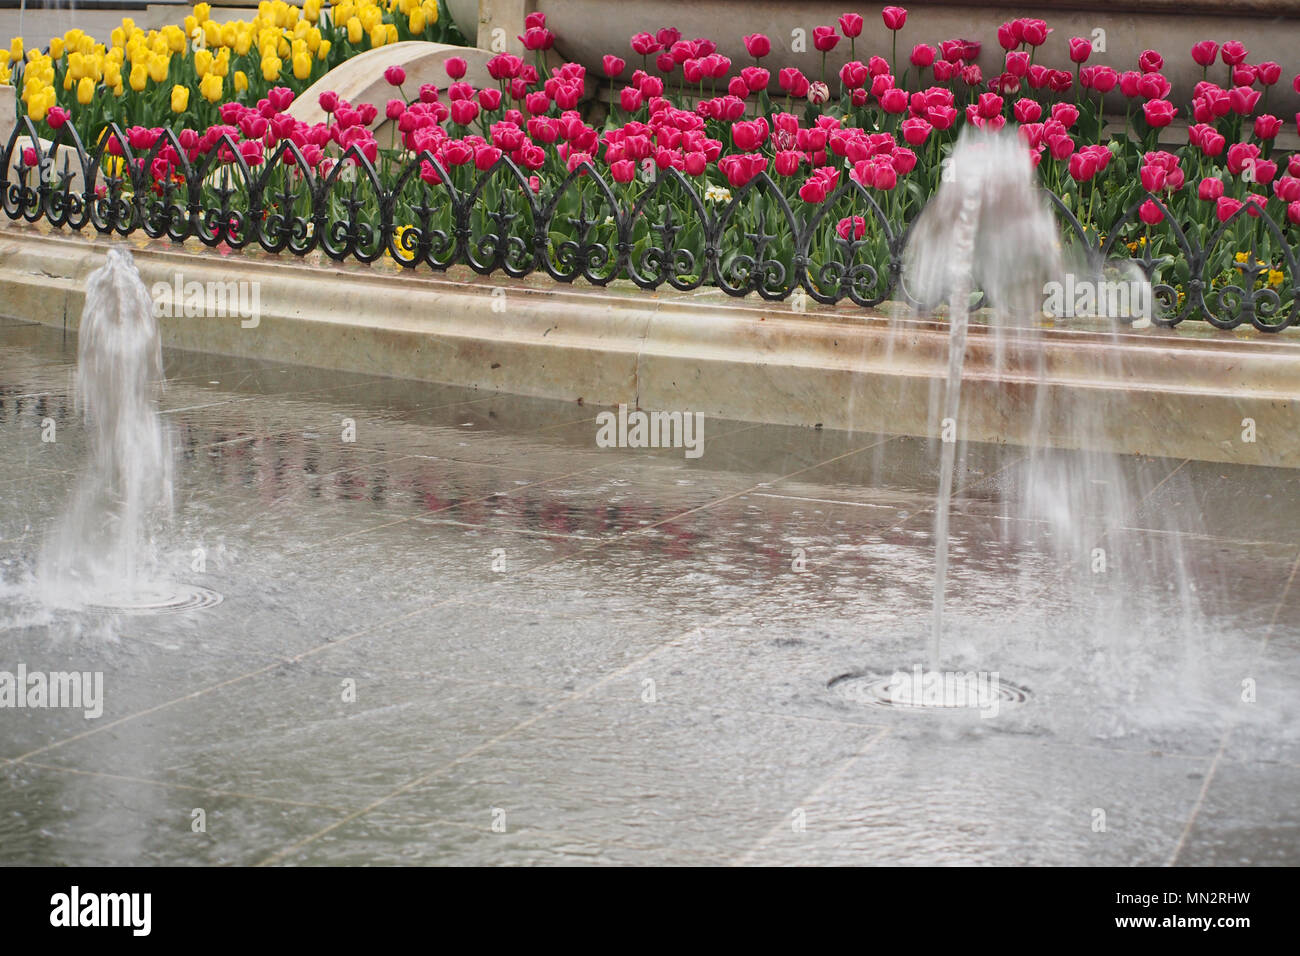 Leicester Square, London, water feature fountains with a back drop of a raised tulip bed Stock Photo